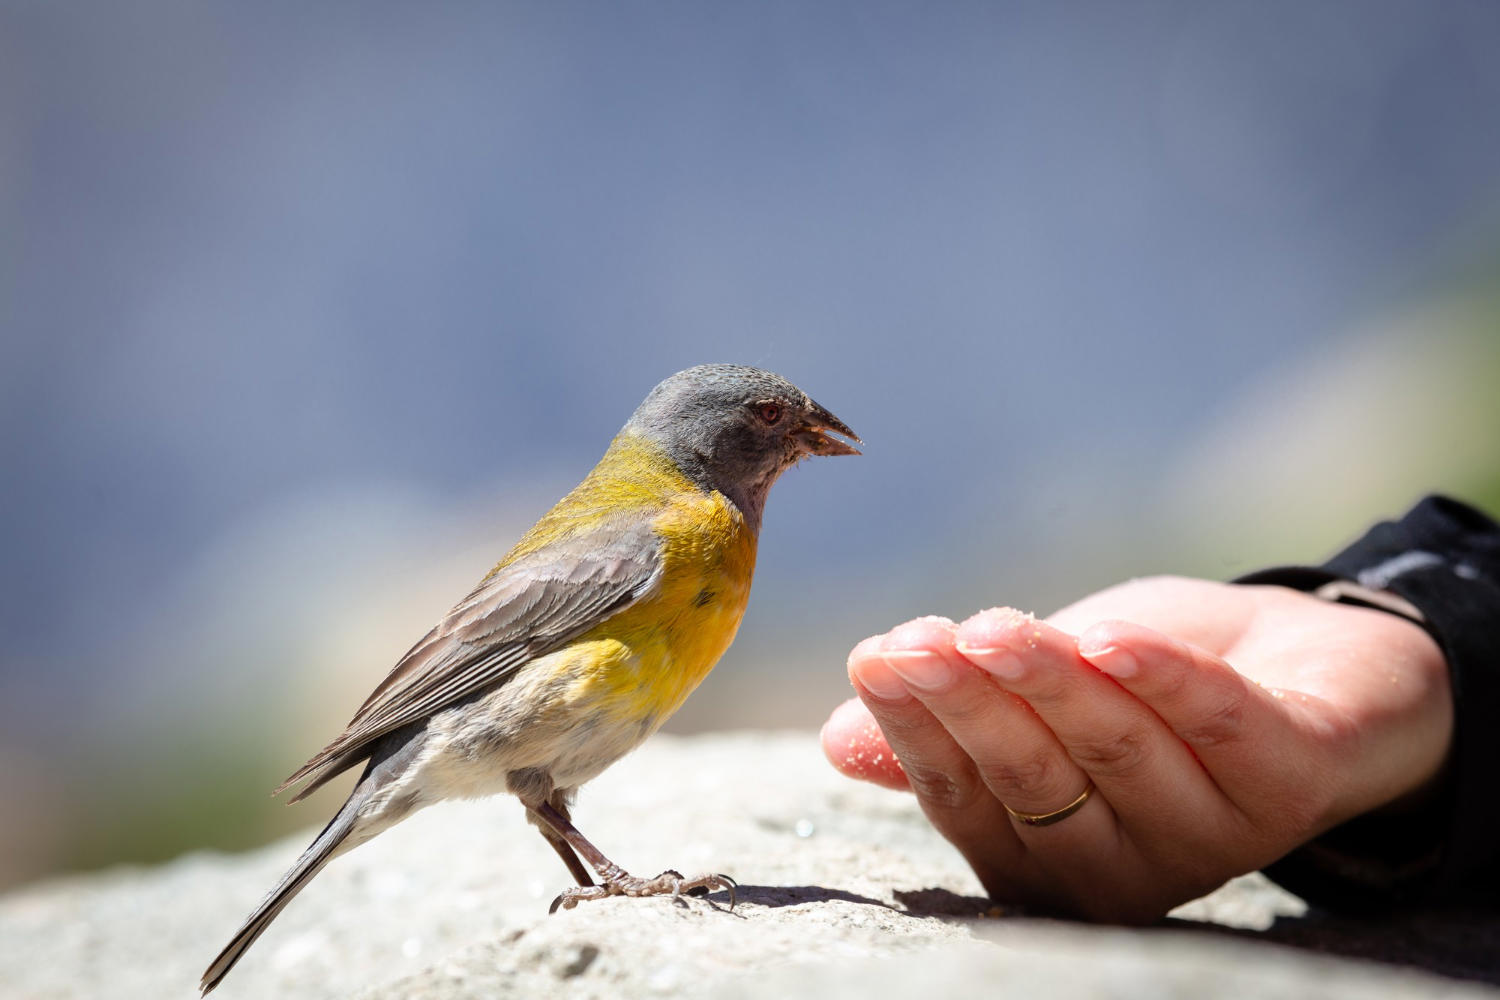 Taming Territoriality: Dealing with Your Bird's Protective Instincts